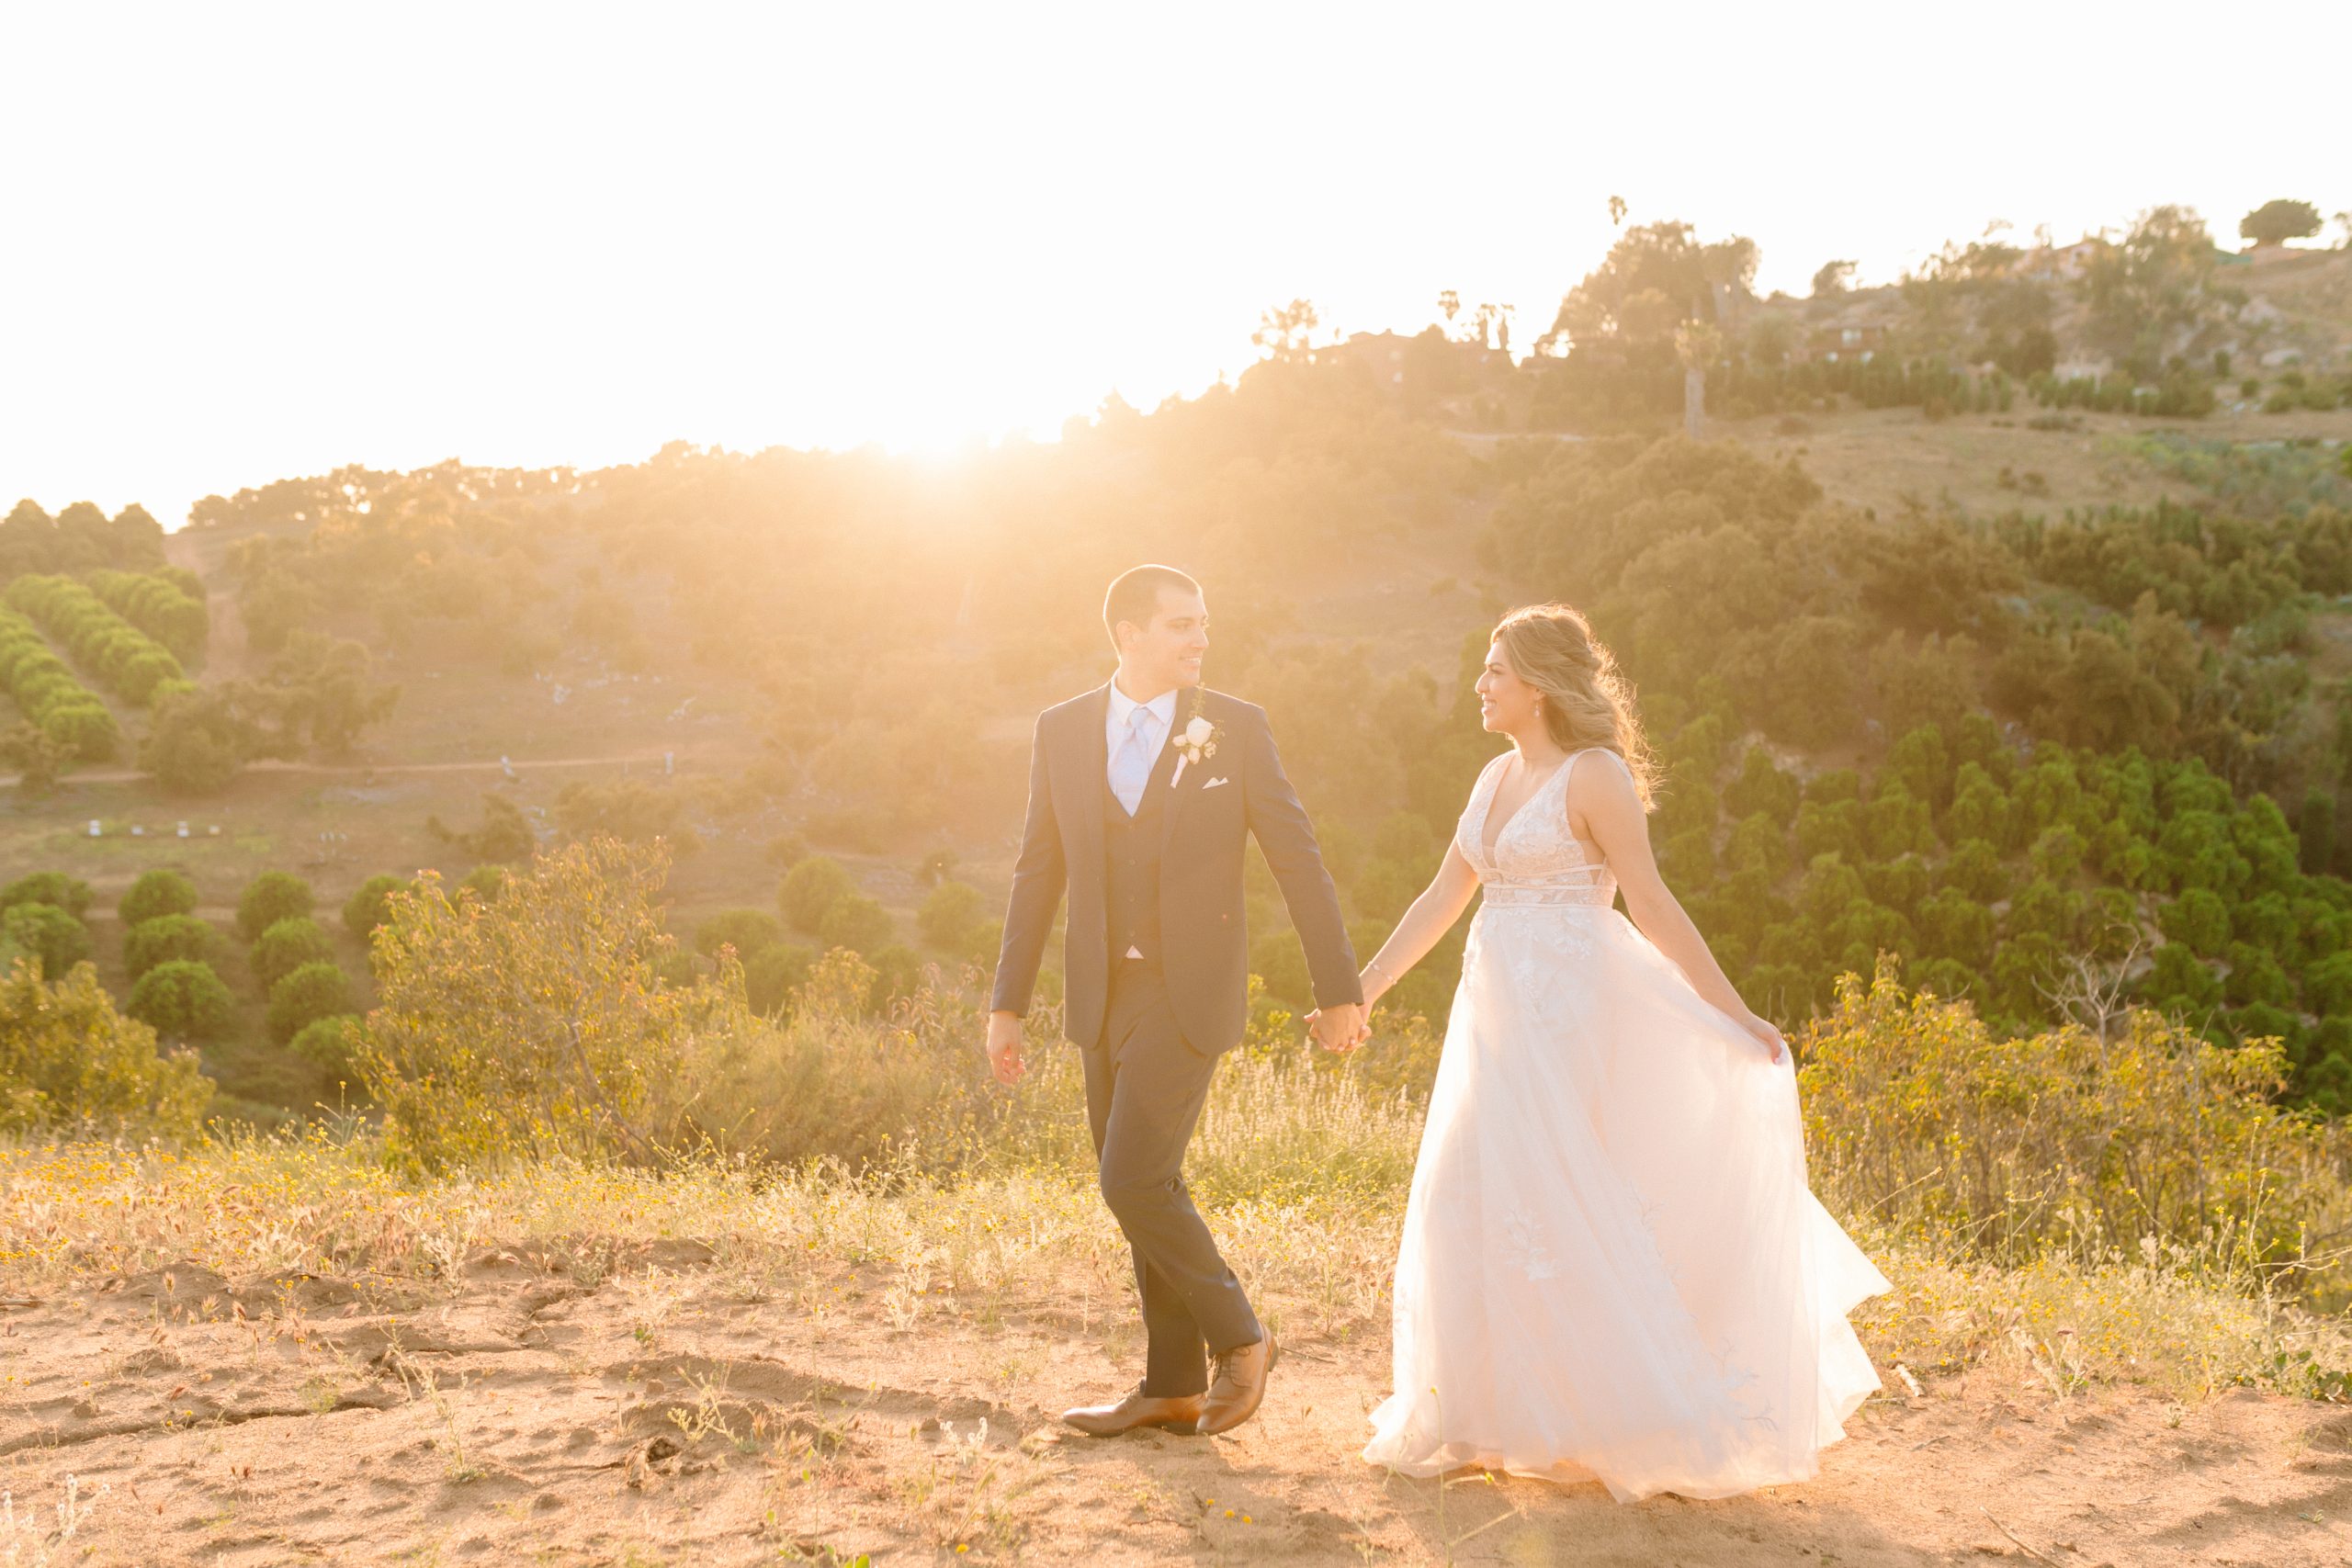 Photo Of Bride And Groom Walking In Sunset With Bride Wearing A-Line Wedding Dress Called Raelynn By Rebecca Ingram